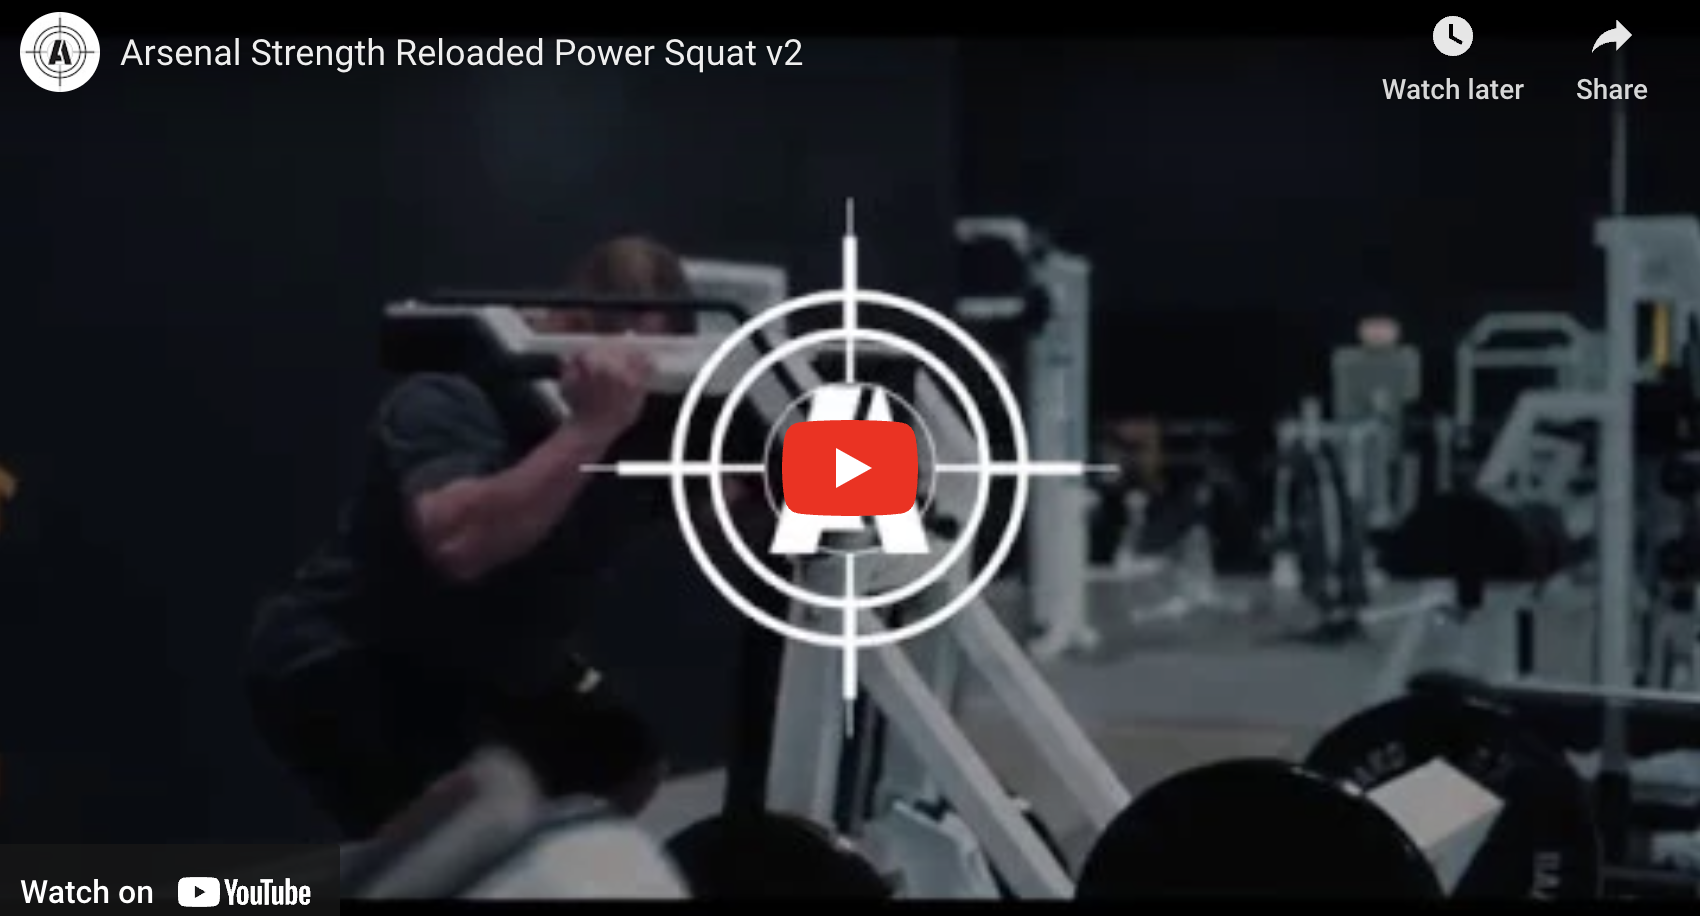 Video of Arsenal Strength Reloaded Power Squat Machine